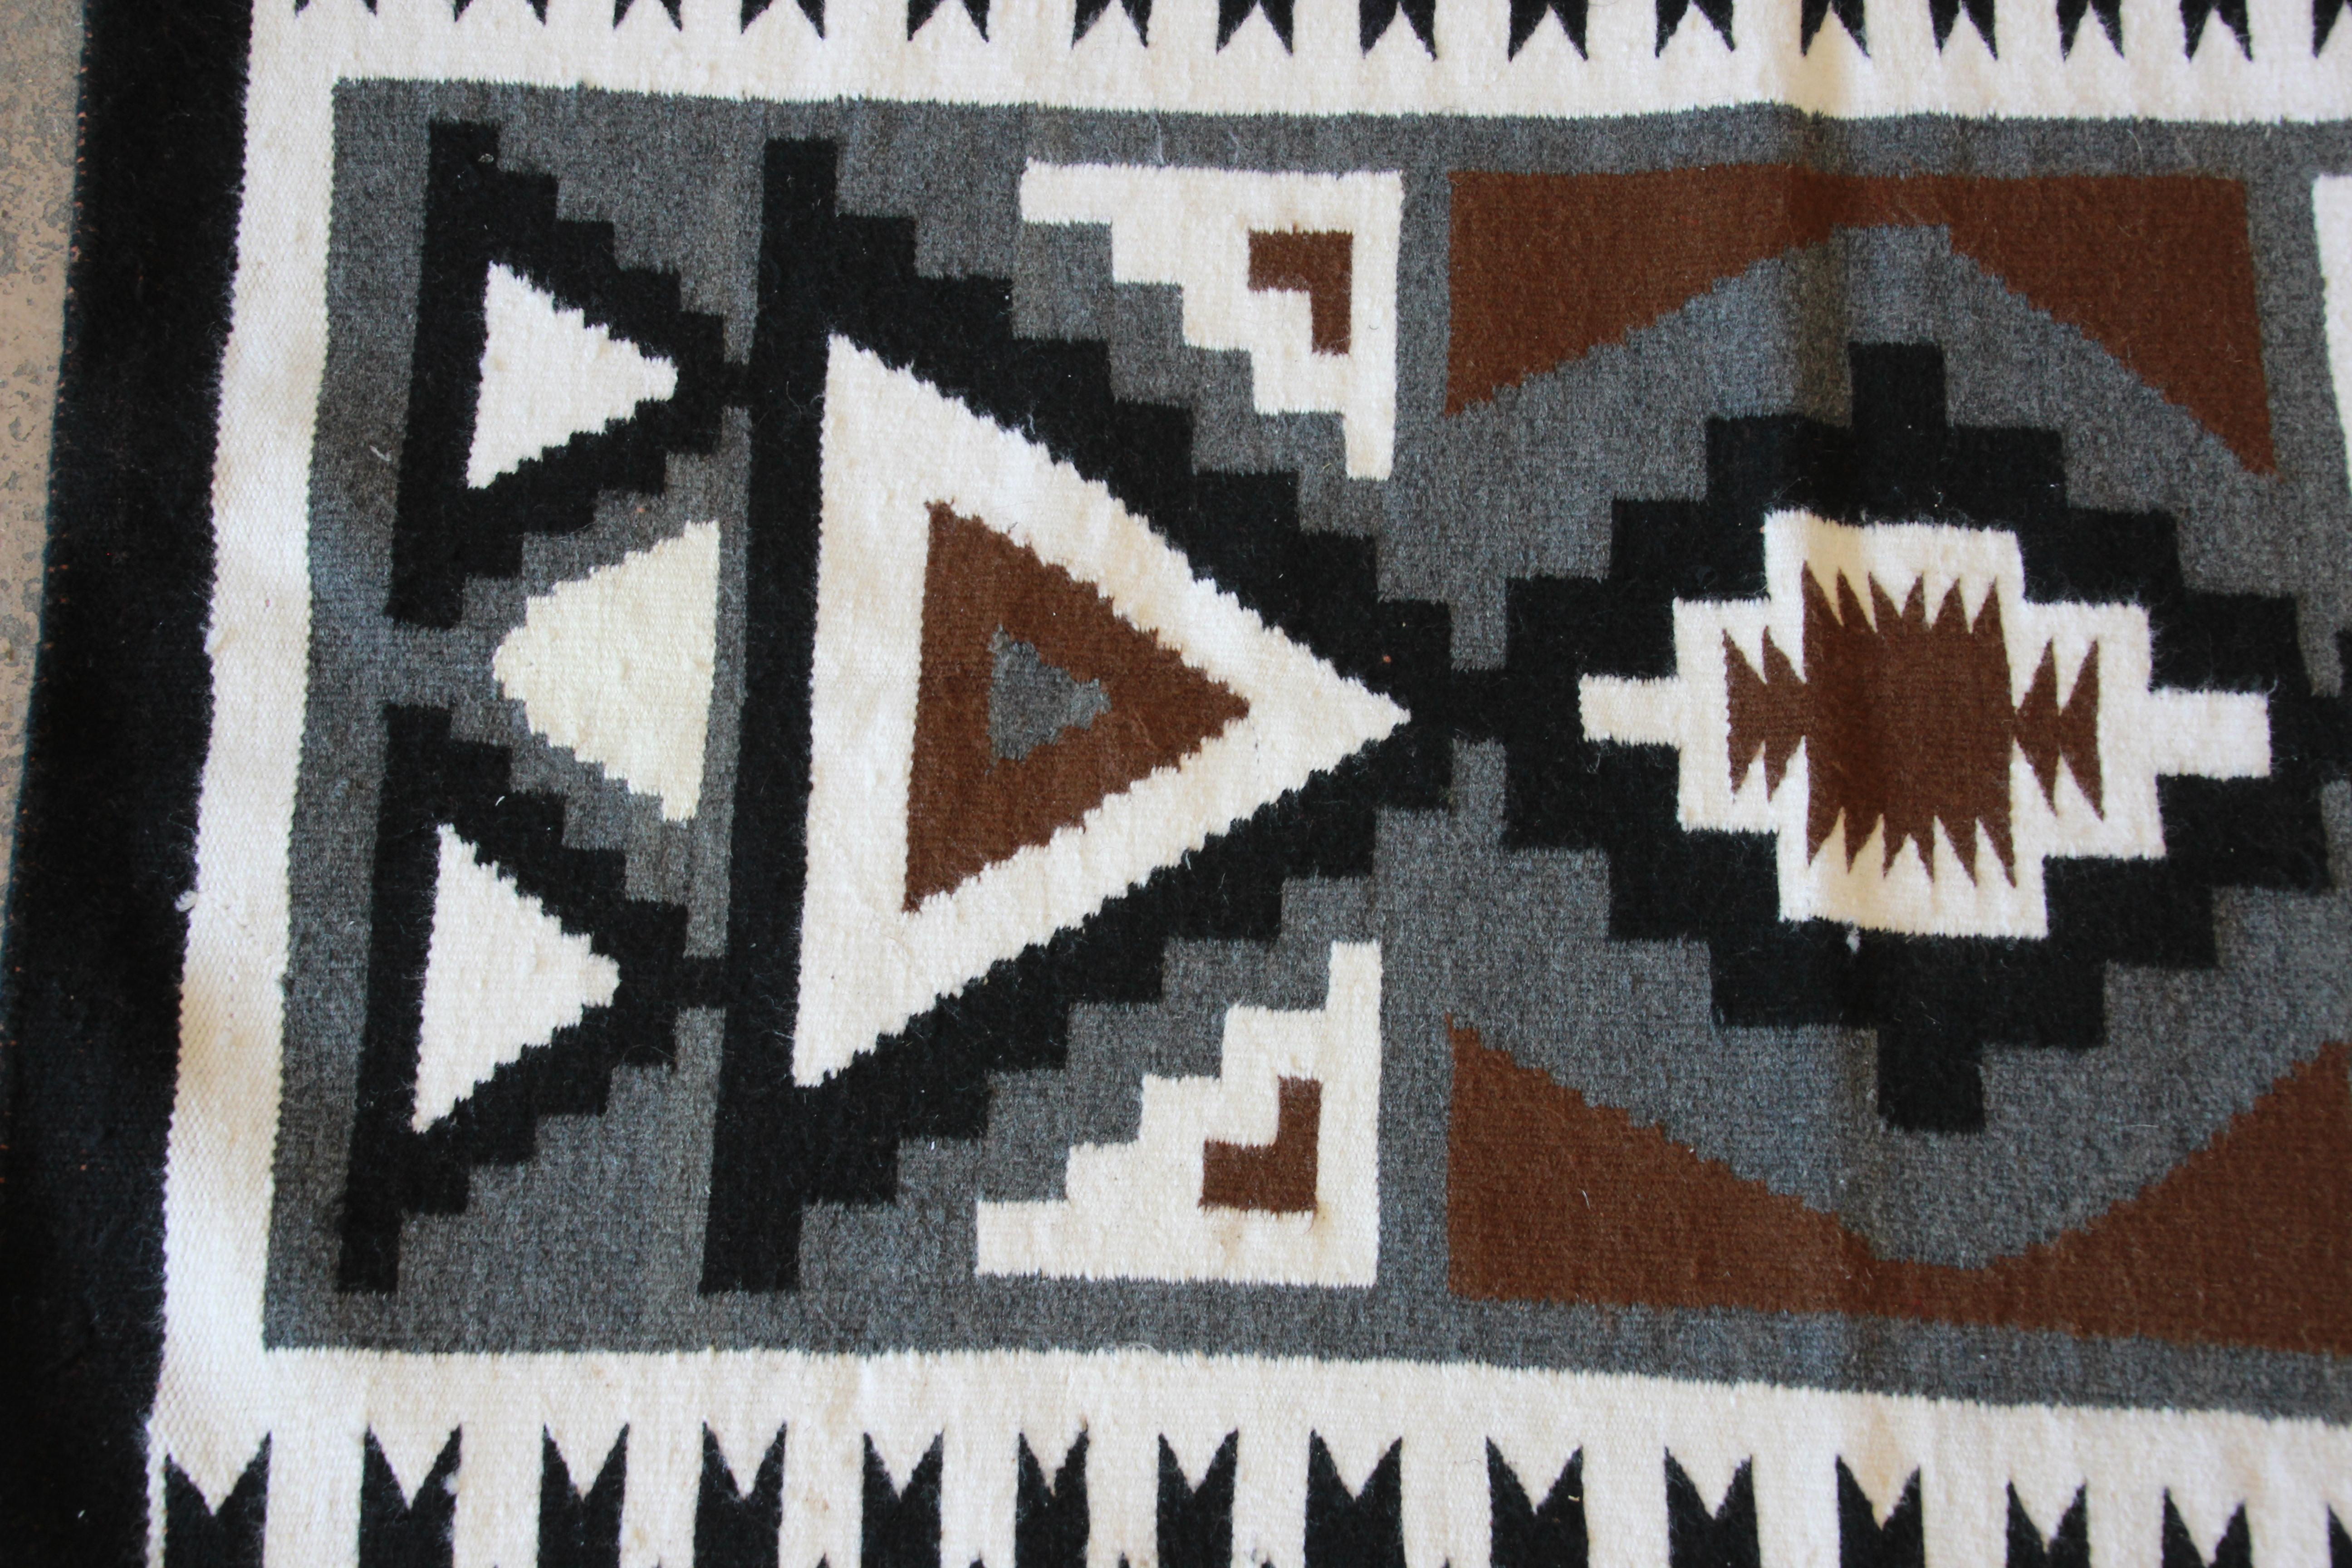 20th Century Vintage Hand-Woven Navajo Rug in Black, White, Brown, and Gray, Circa 1950s For Sale